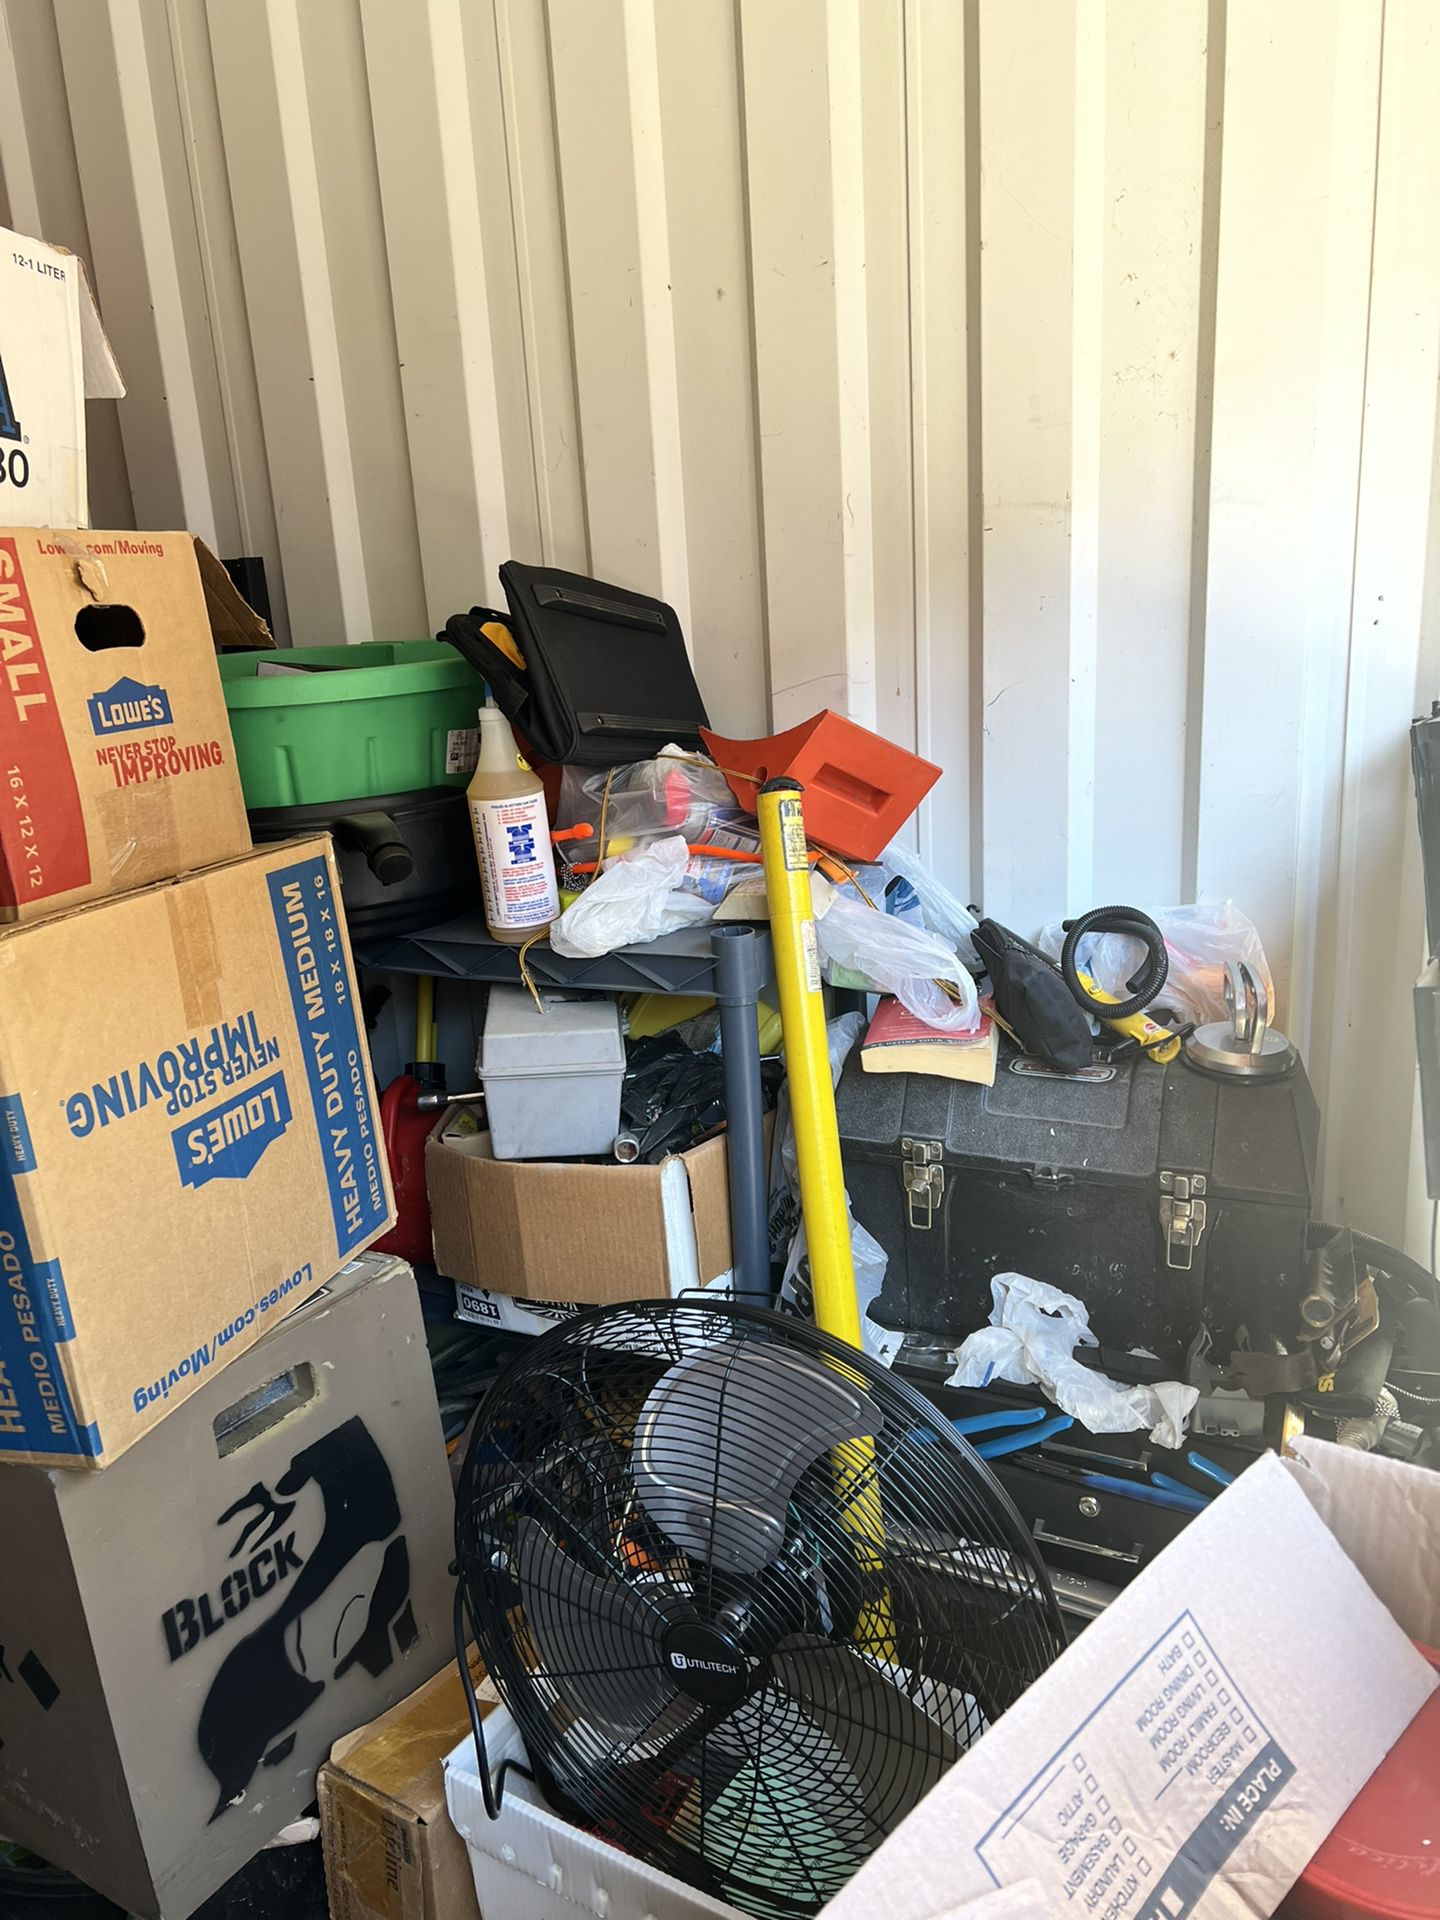 moving sale/ storage clean out